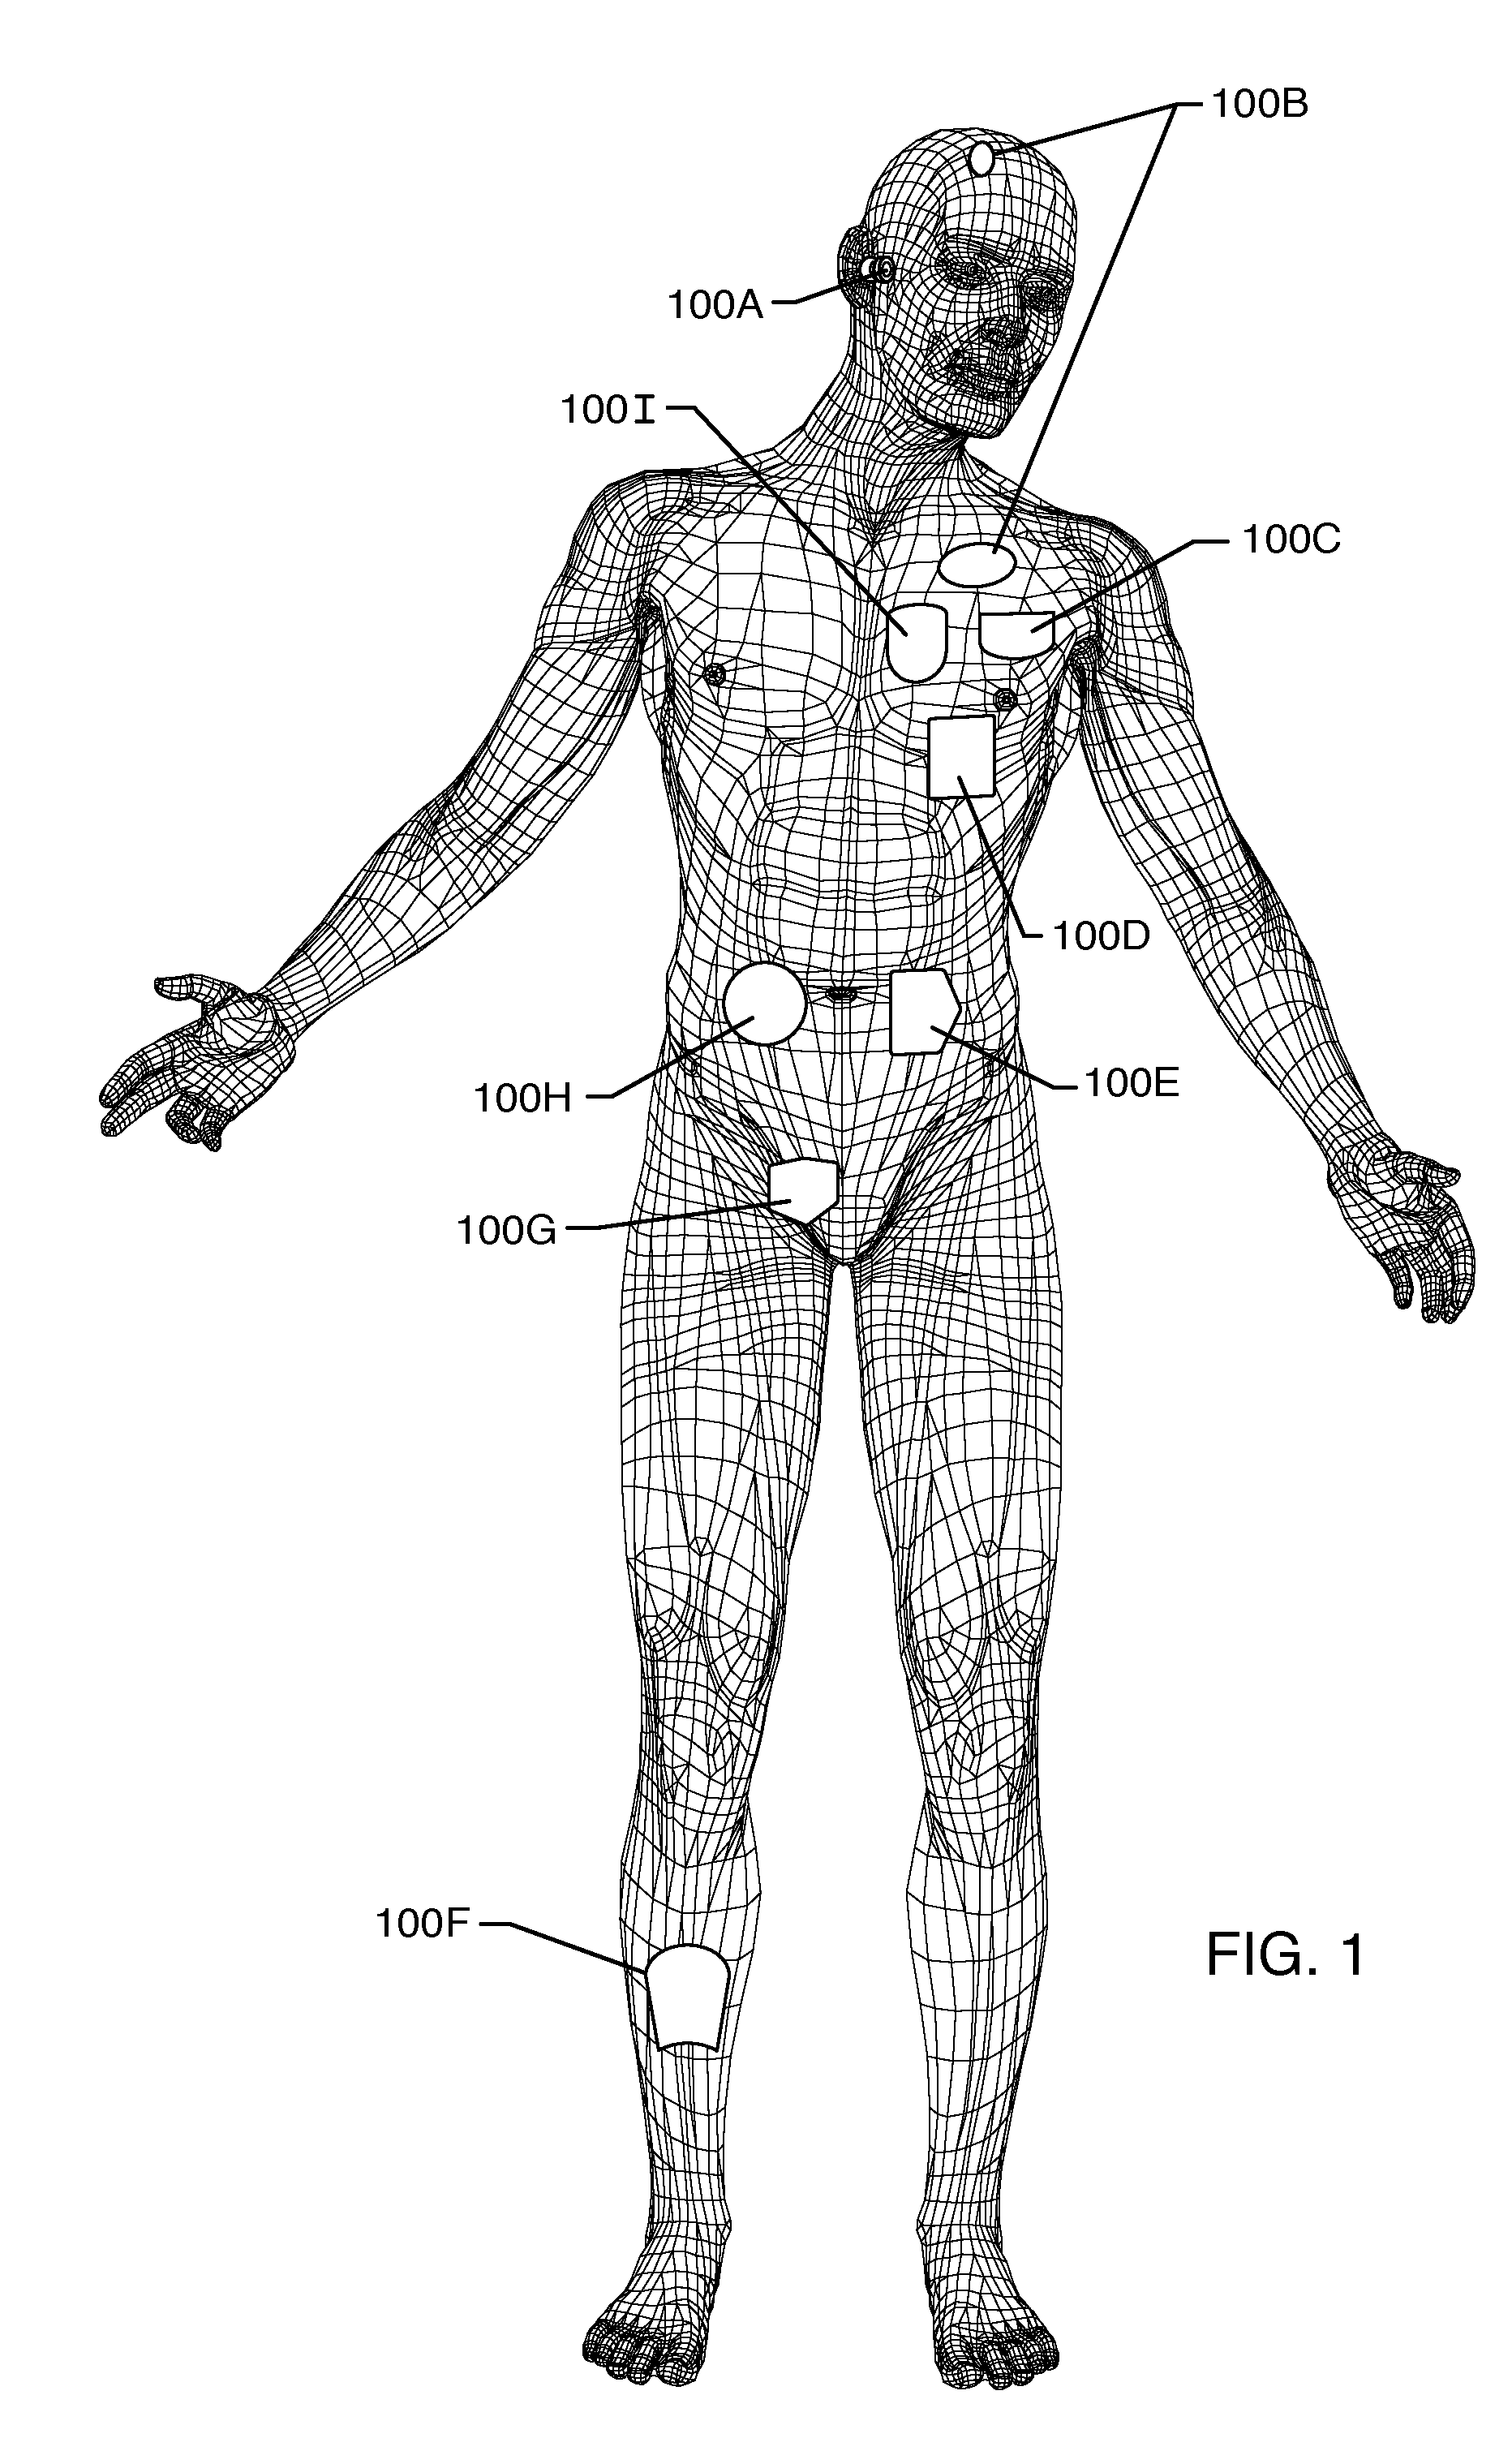 Modular EMI filtered terminal assembly for an active implantable medical device